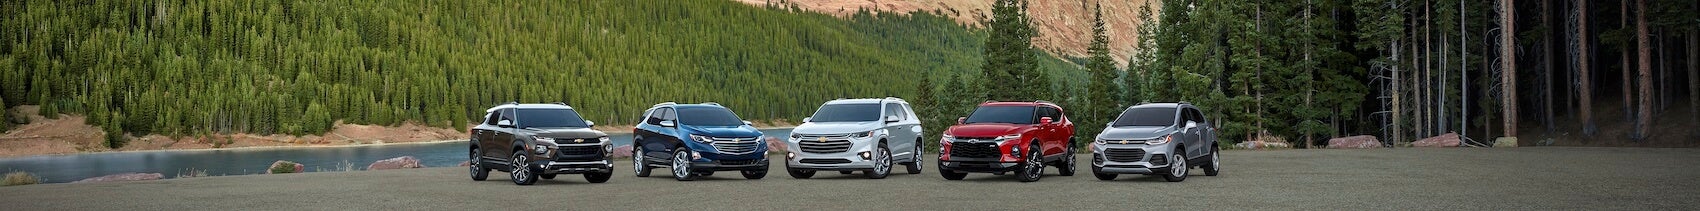 Best Used Chevy Models